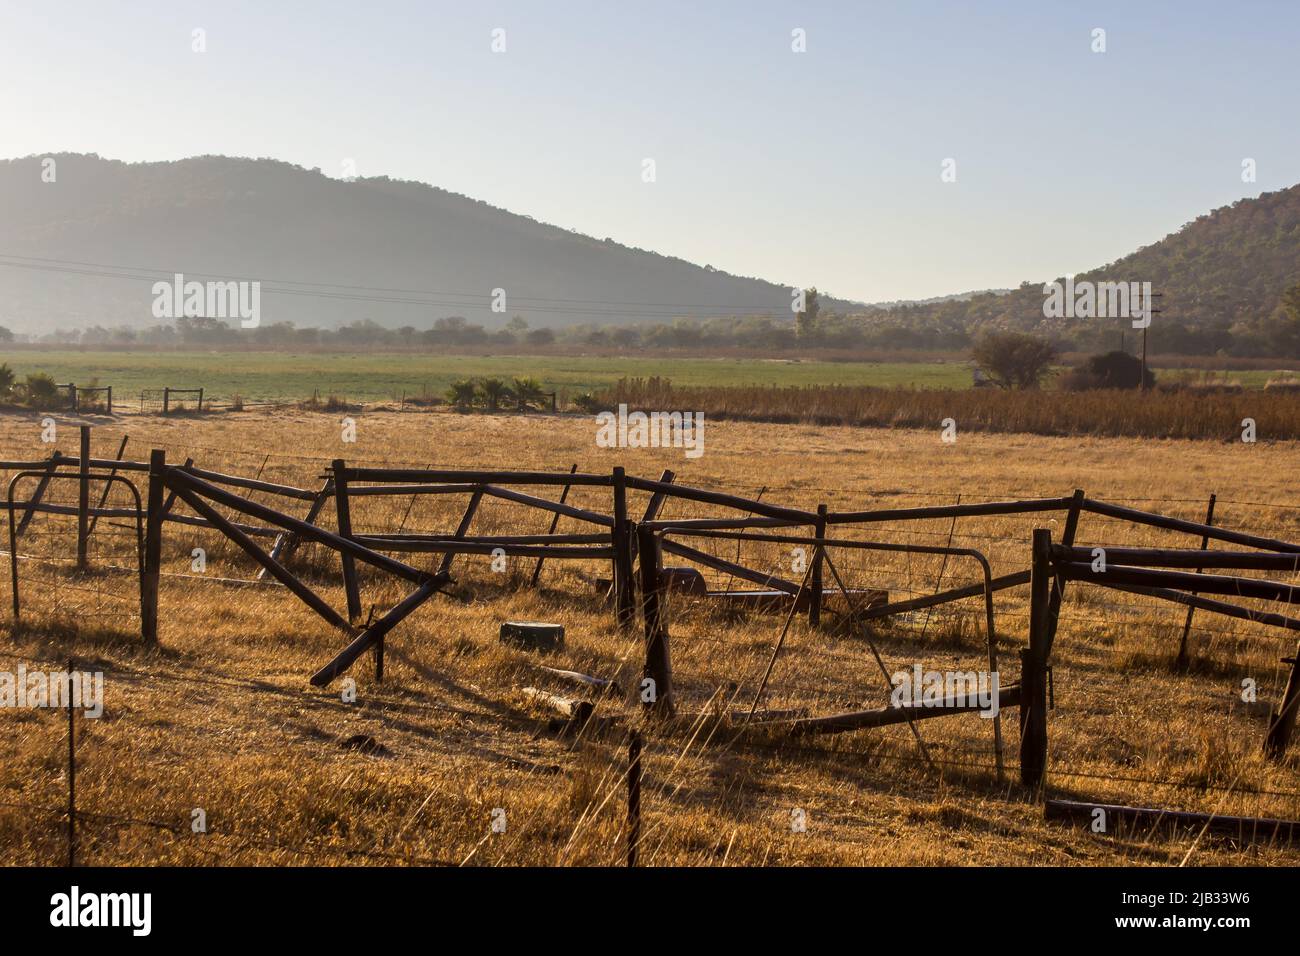 Early morning view over a farm in Rural Free State, South Africa, with a broken Fence in the foreground Stock Photo